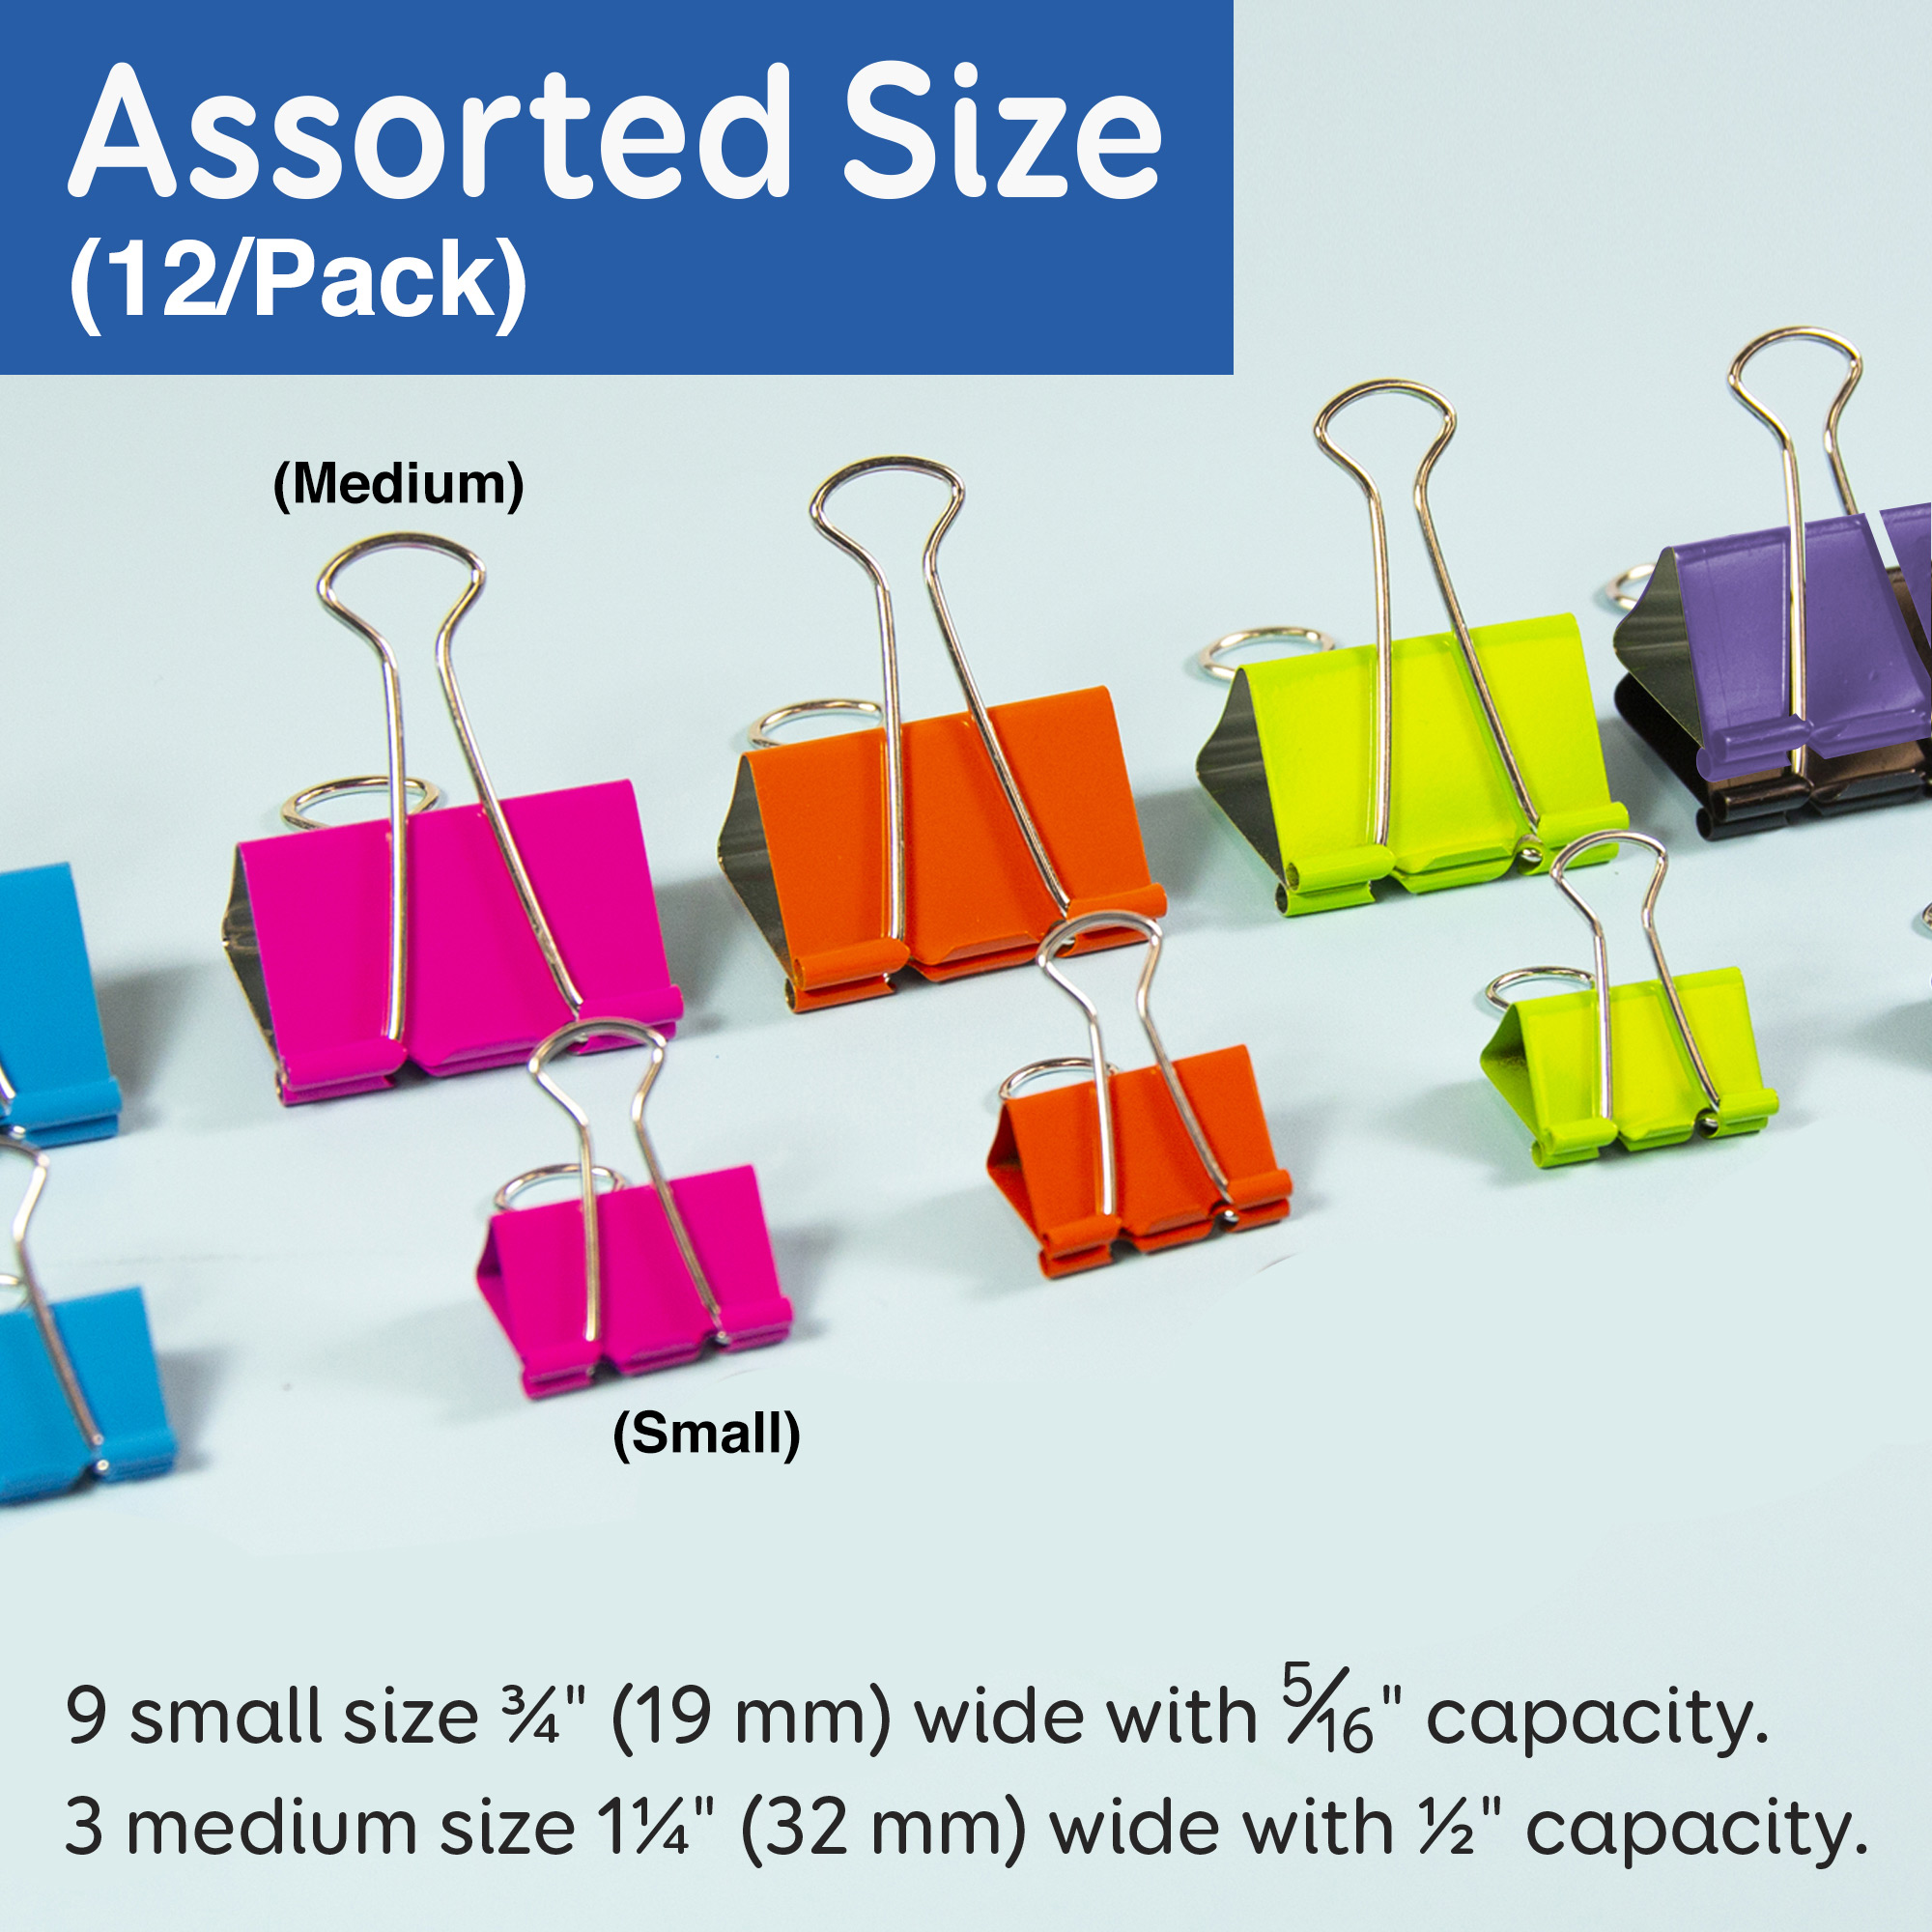 BAZIC Assorted Size Color Binder Clip (12/Pack) Bazic Products